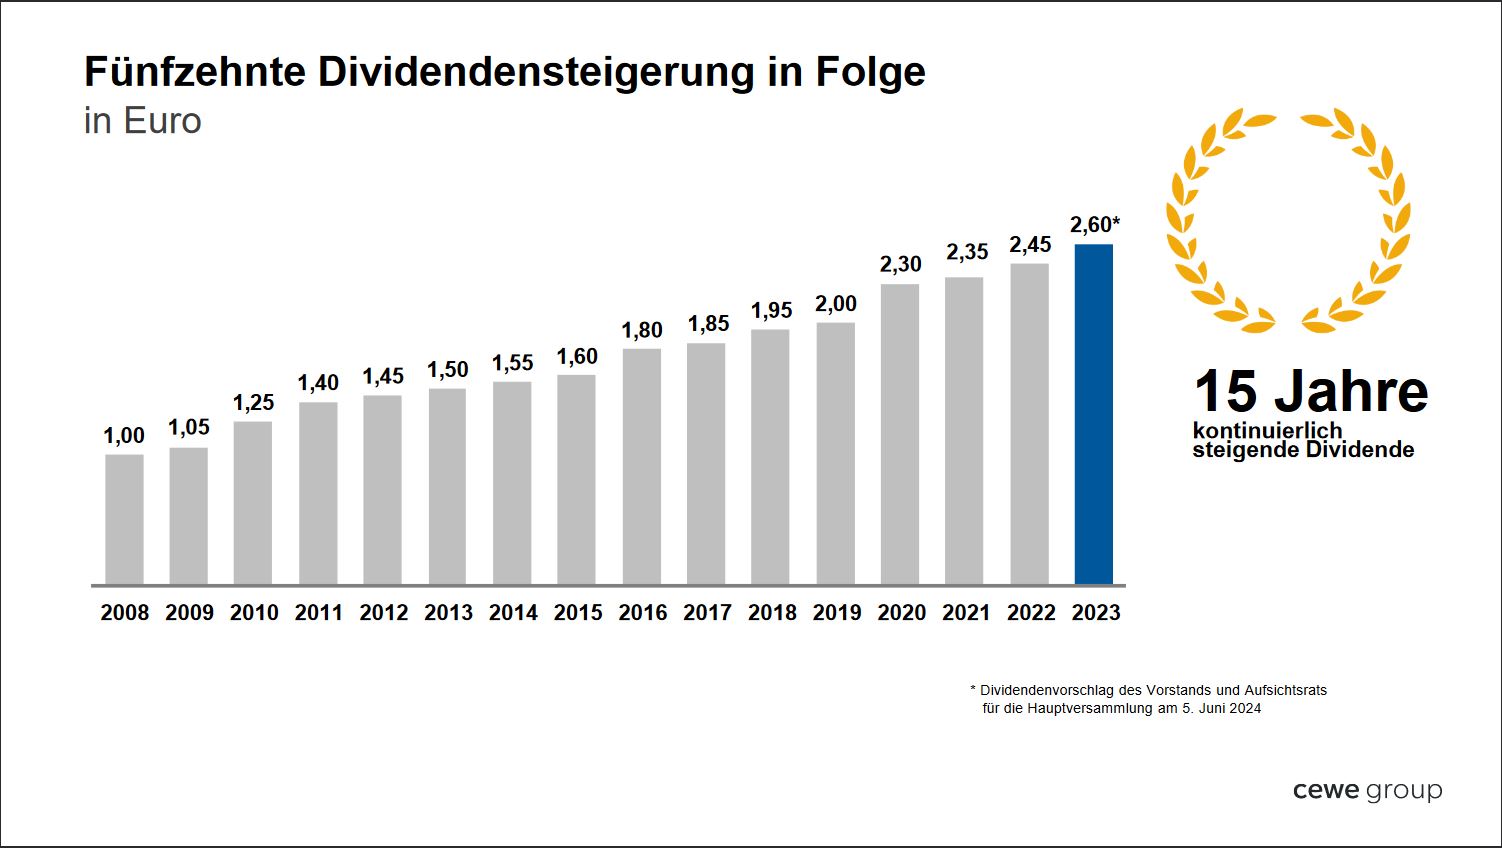 DIVIDEND payed in last 14 years